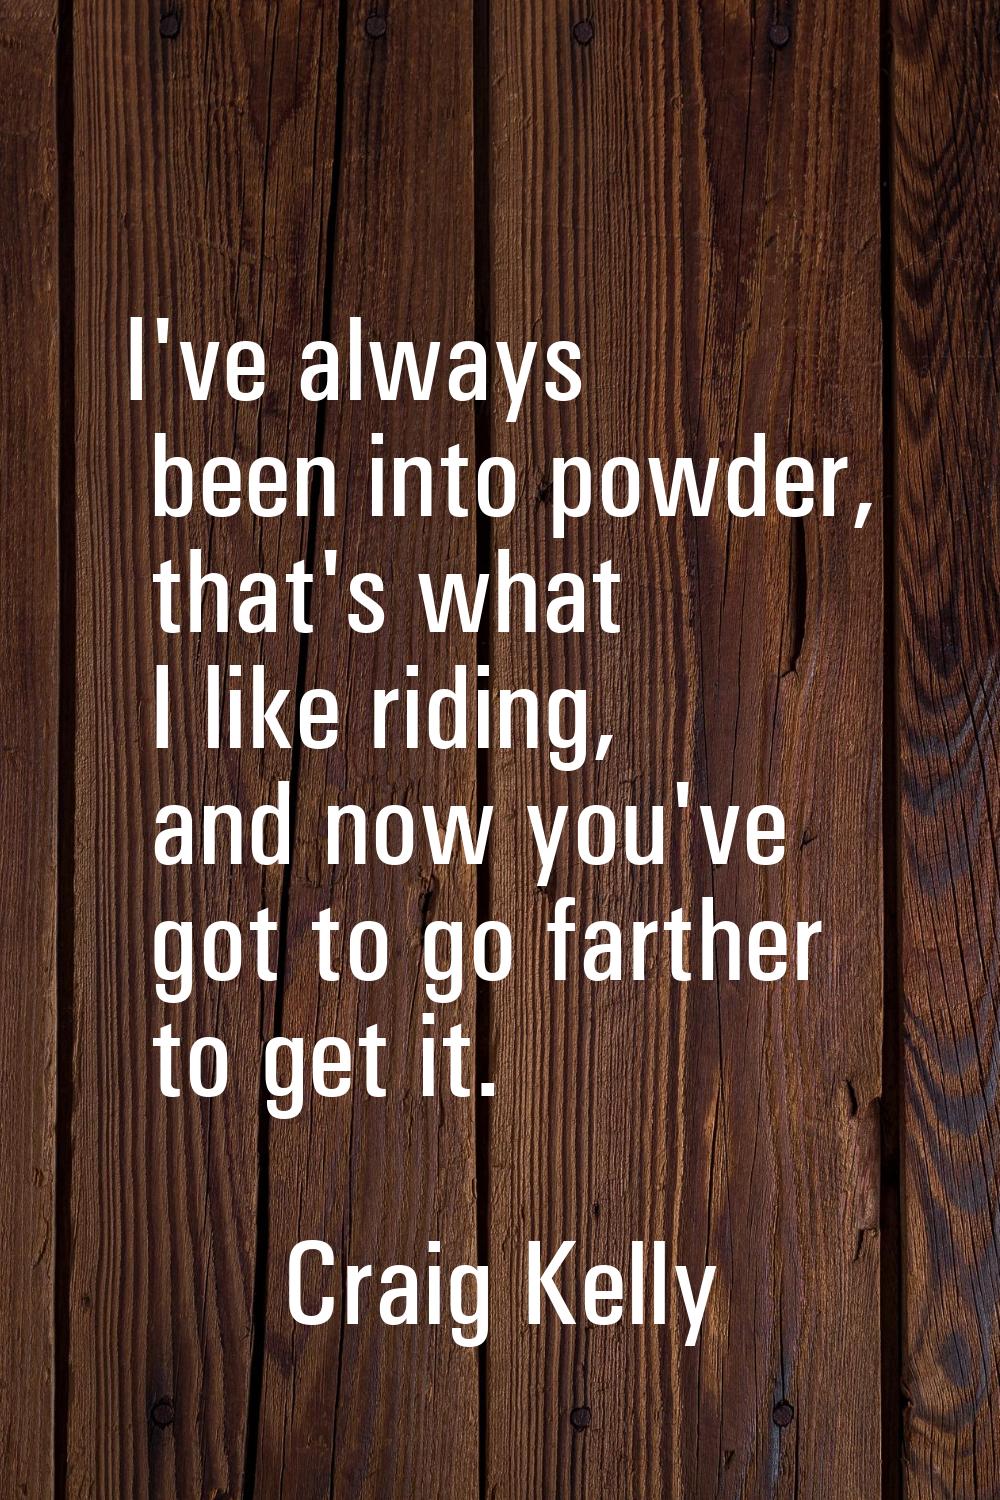 I've always been into powder, that's what I like riding, and now you've got to go farther to get it